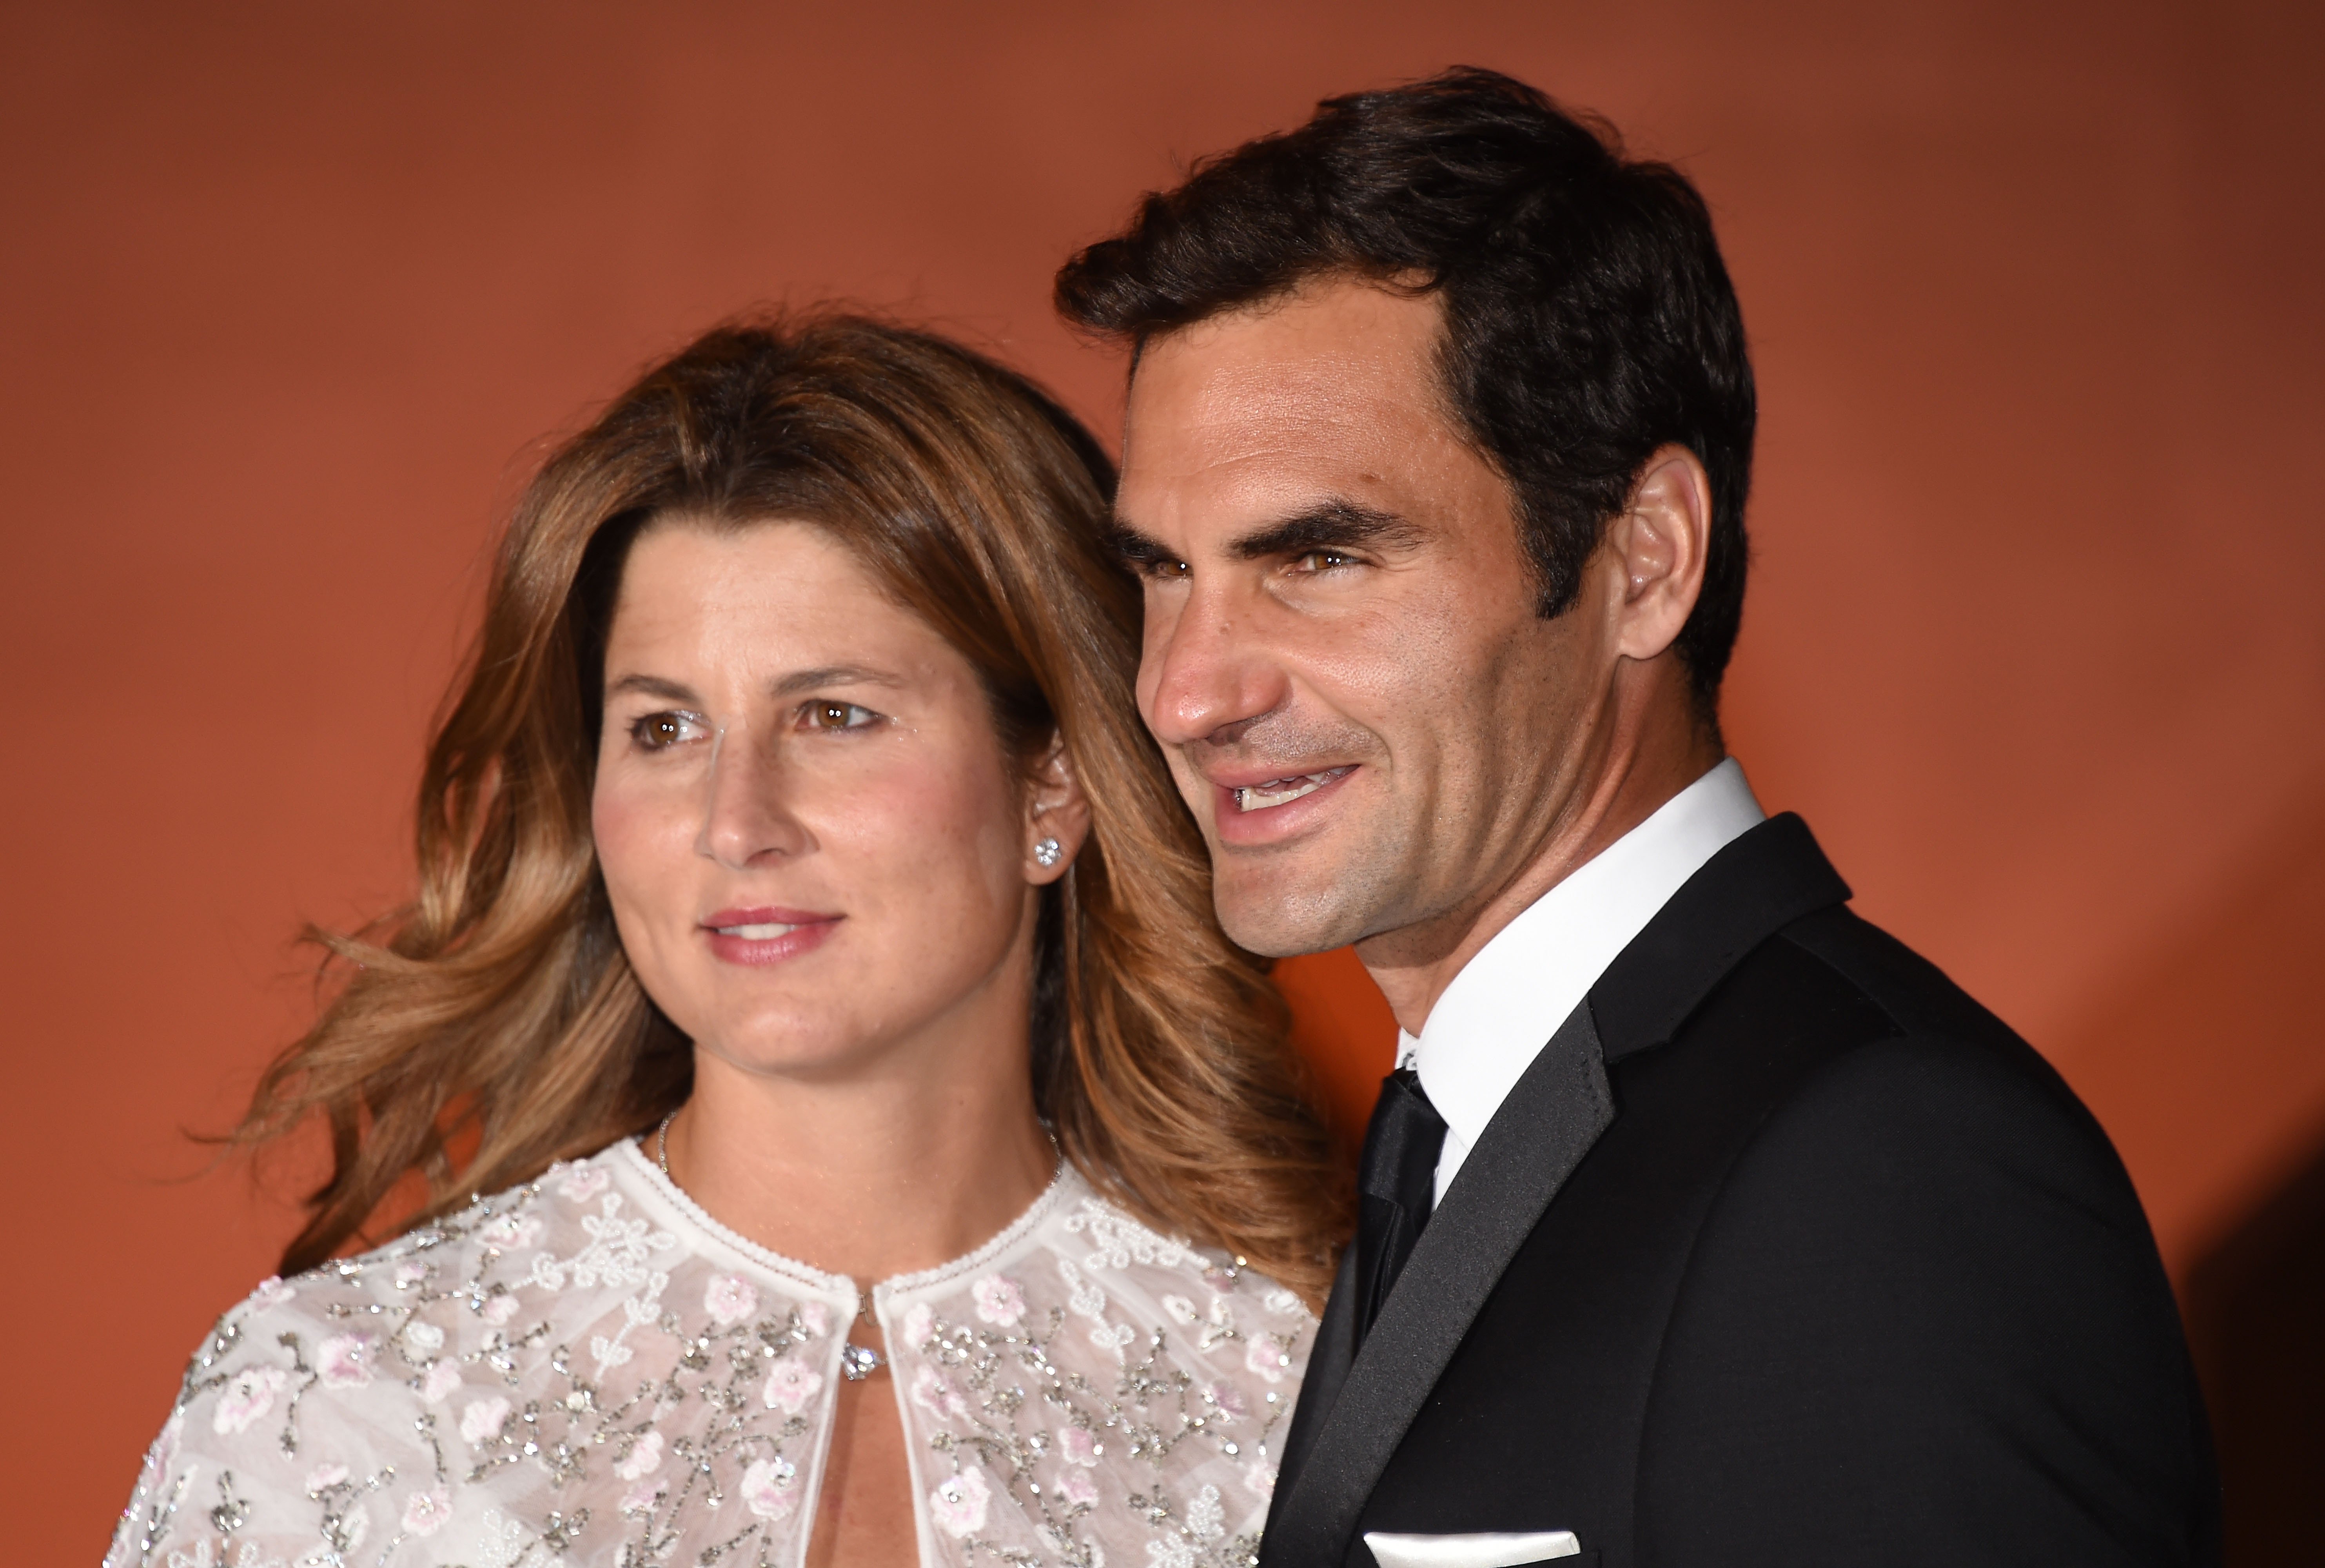 Roger and Mirka Federer attend the Wimbledon Champions Dinner 2017 on July 16, 2017, in London, England. | Source: Getty Images